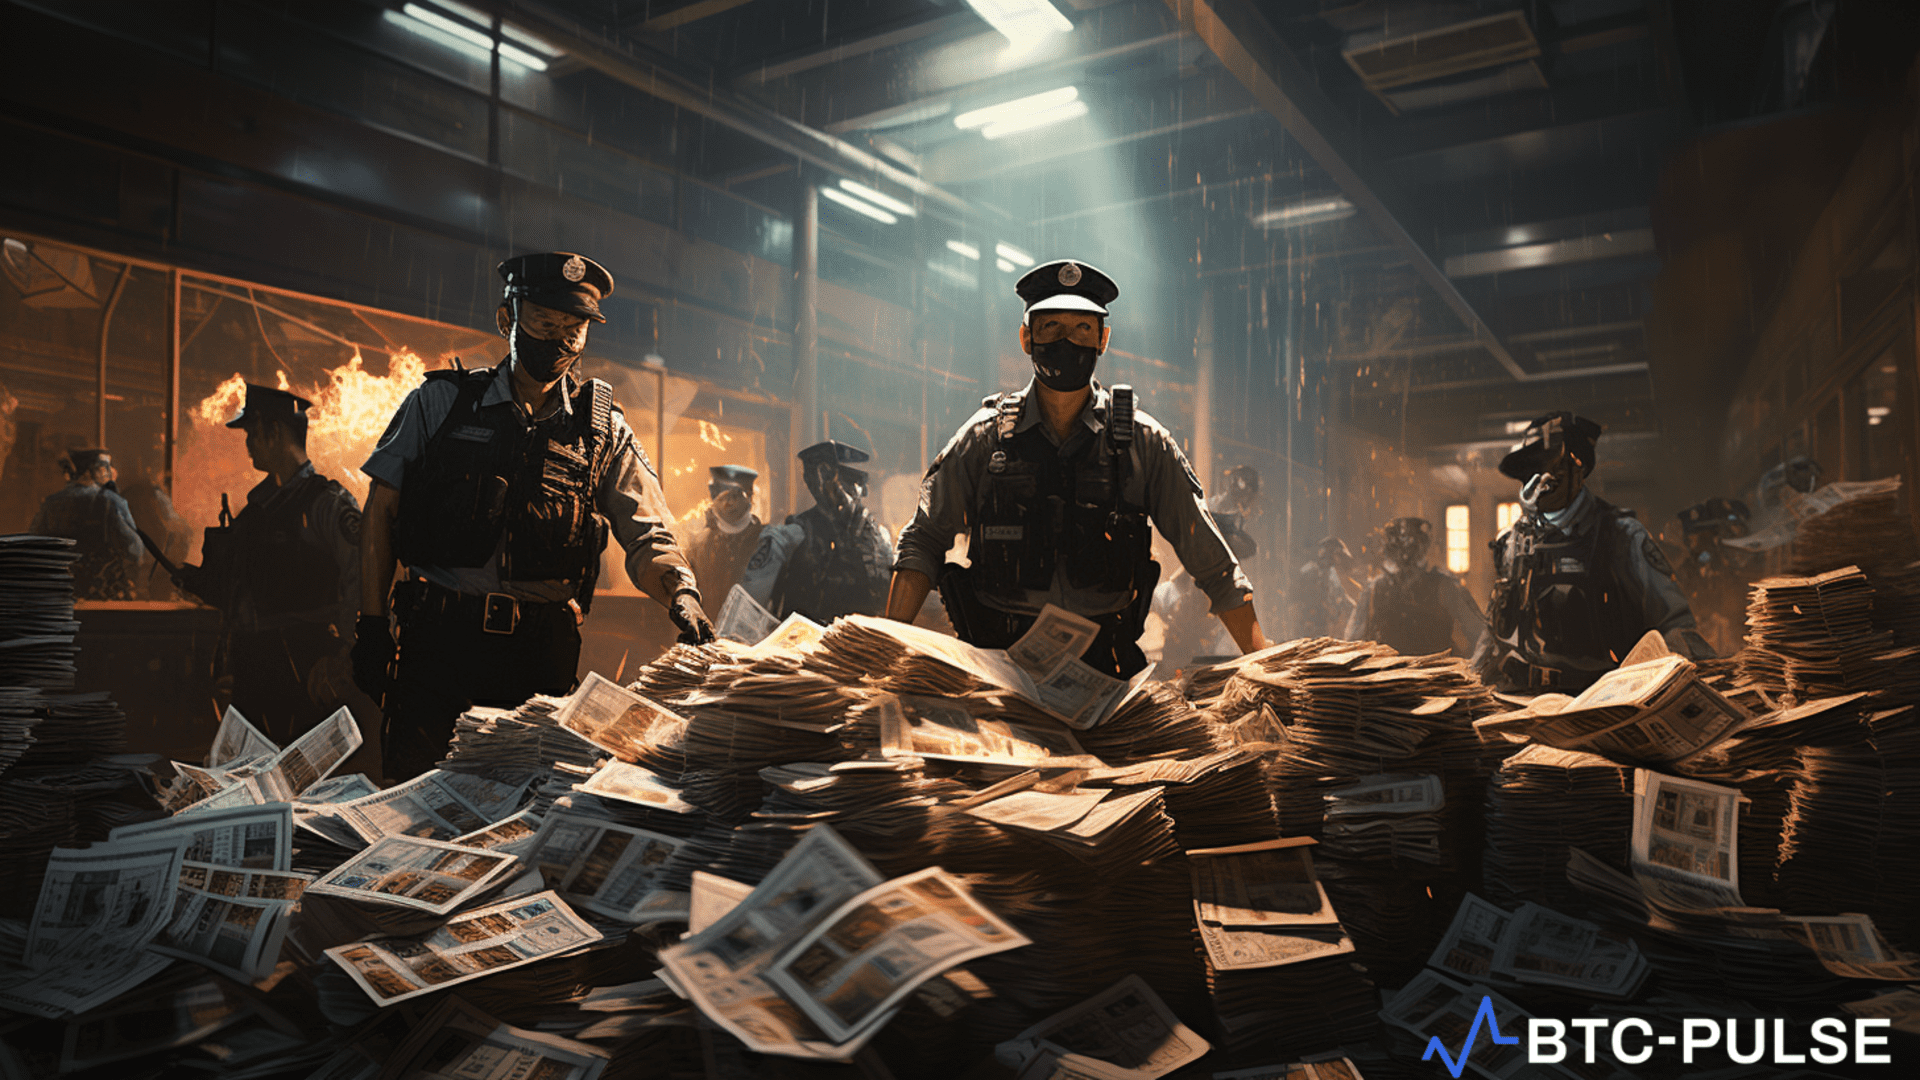 Hong Kong police officers during a crackdown on fraud and money laundering operations.